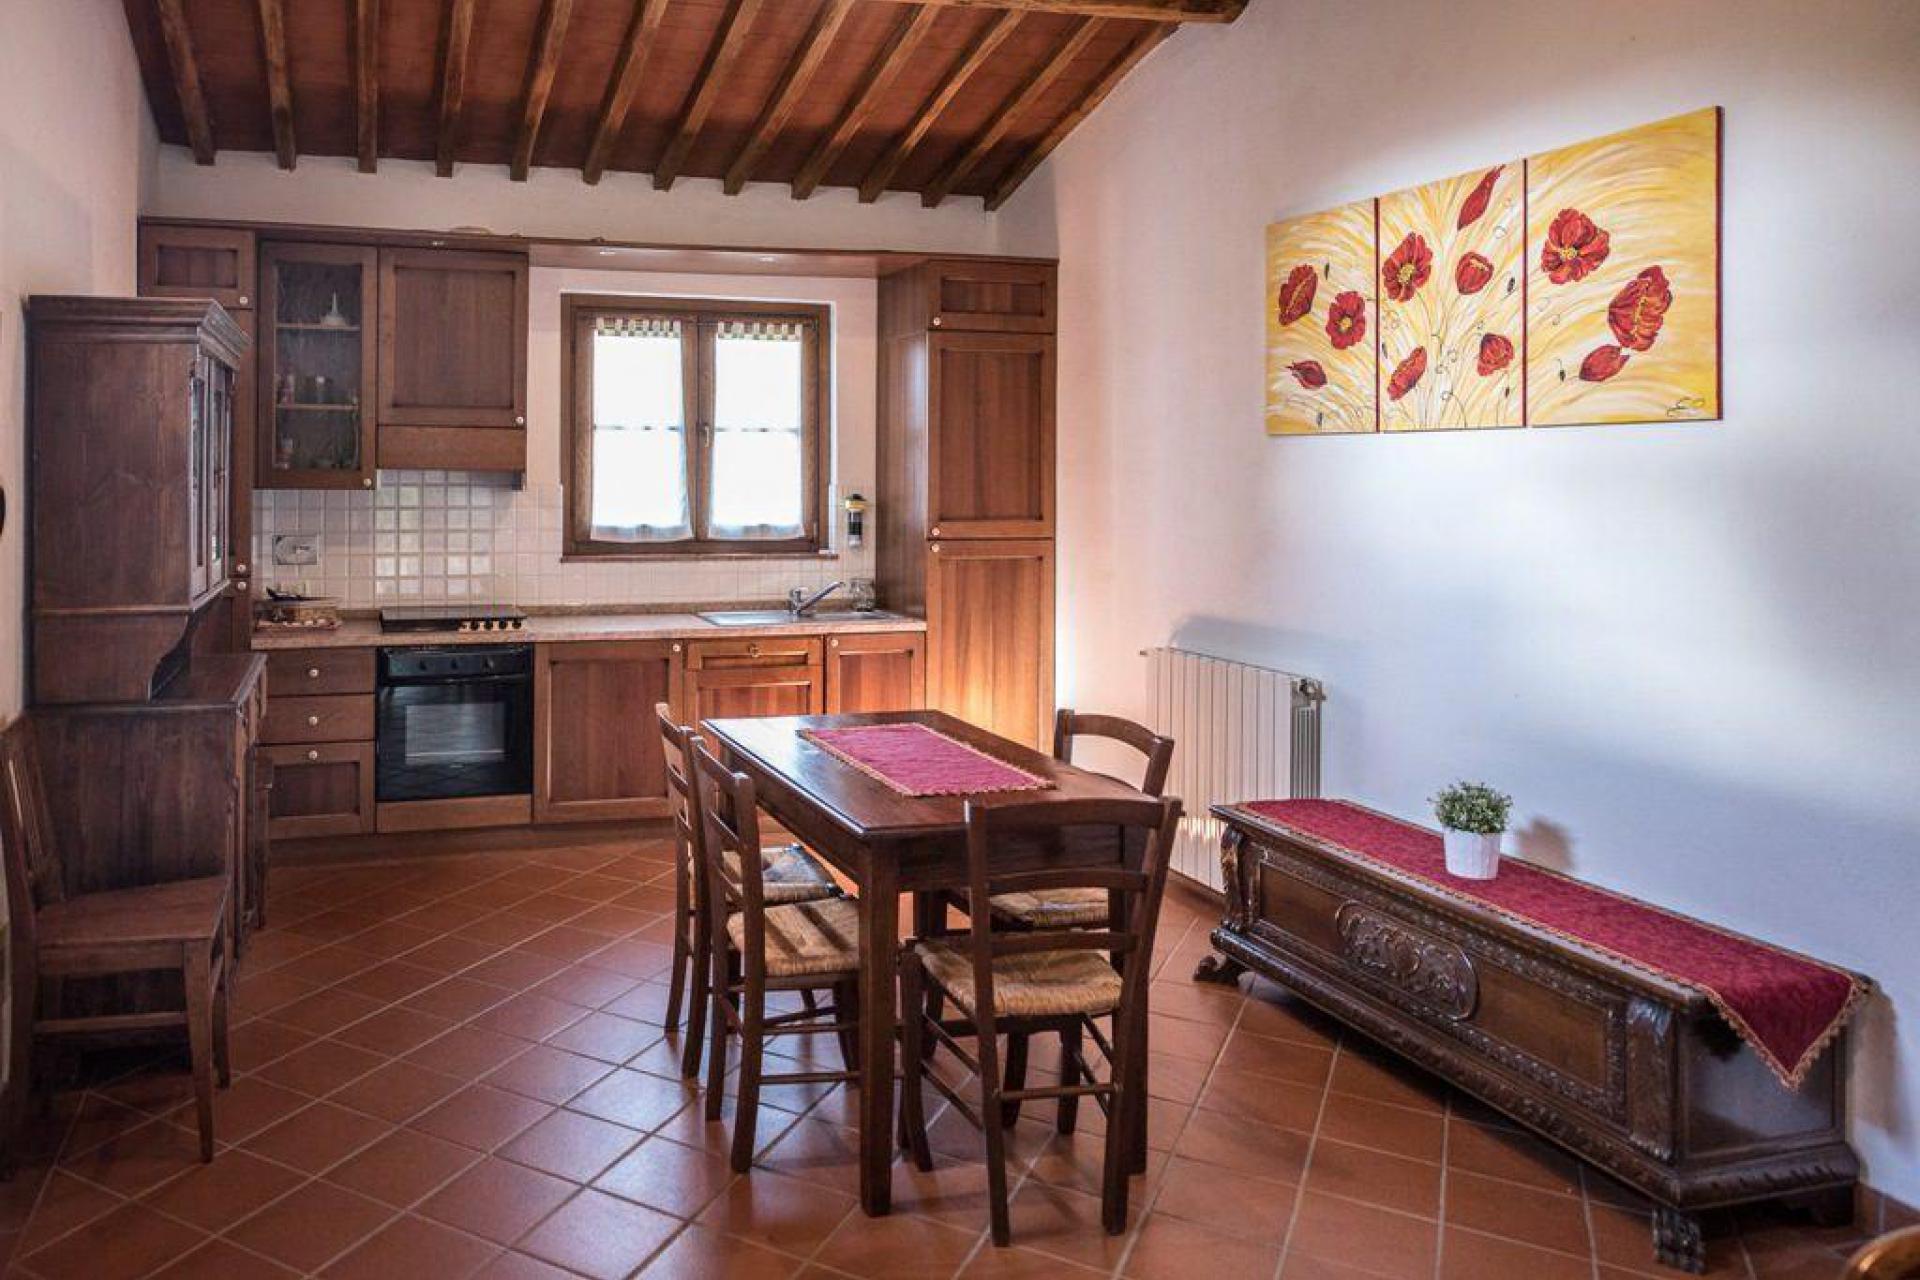 Agriturismo Tuscany Agriturismo in a quiet and rural location in Tuscany